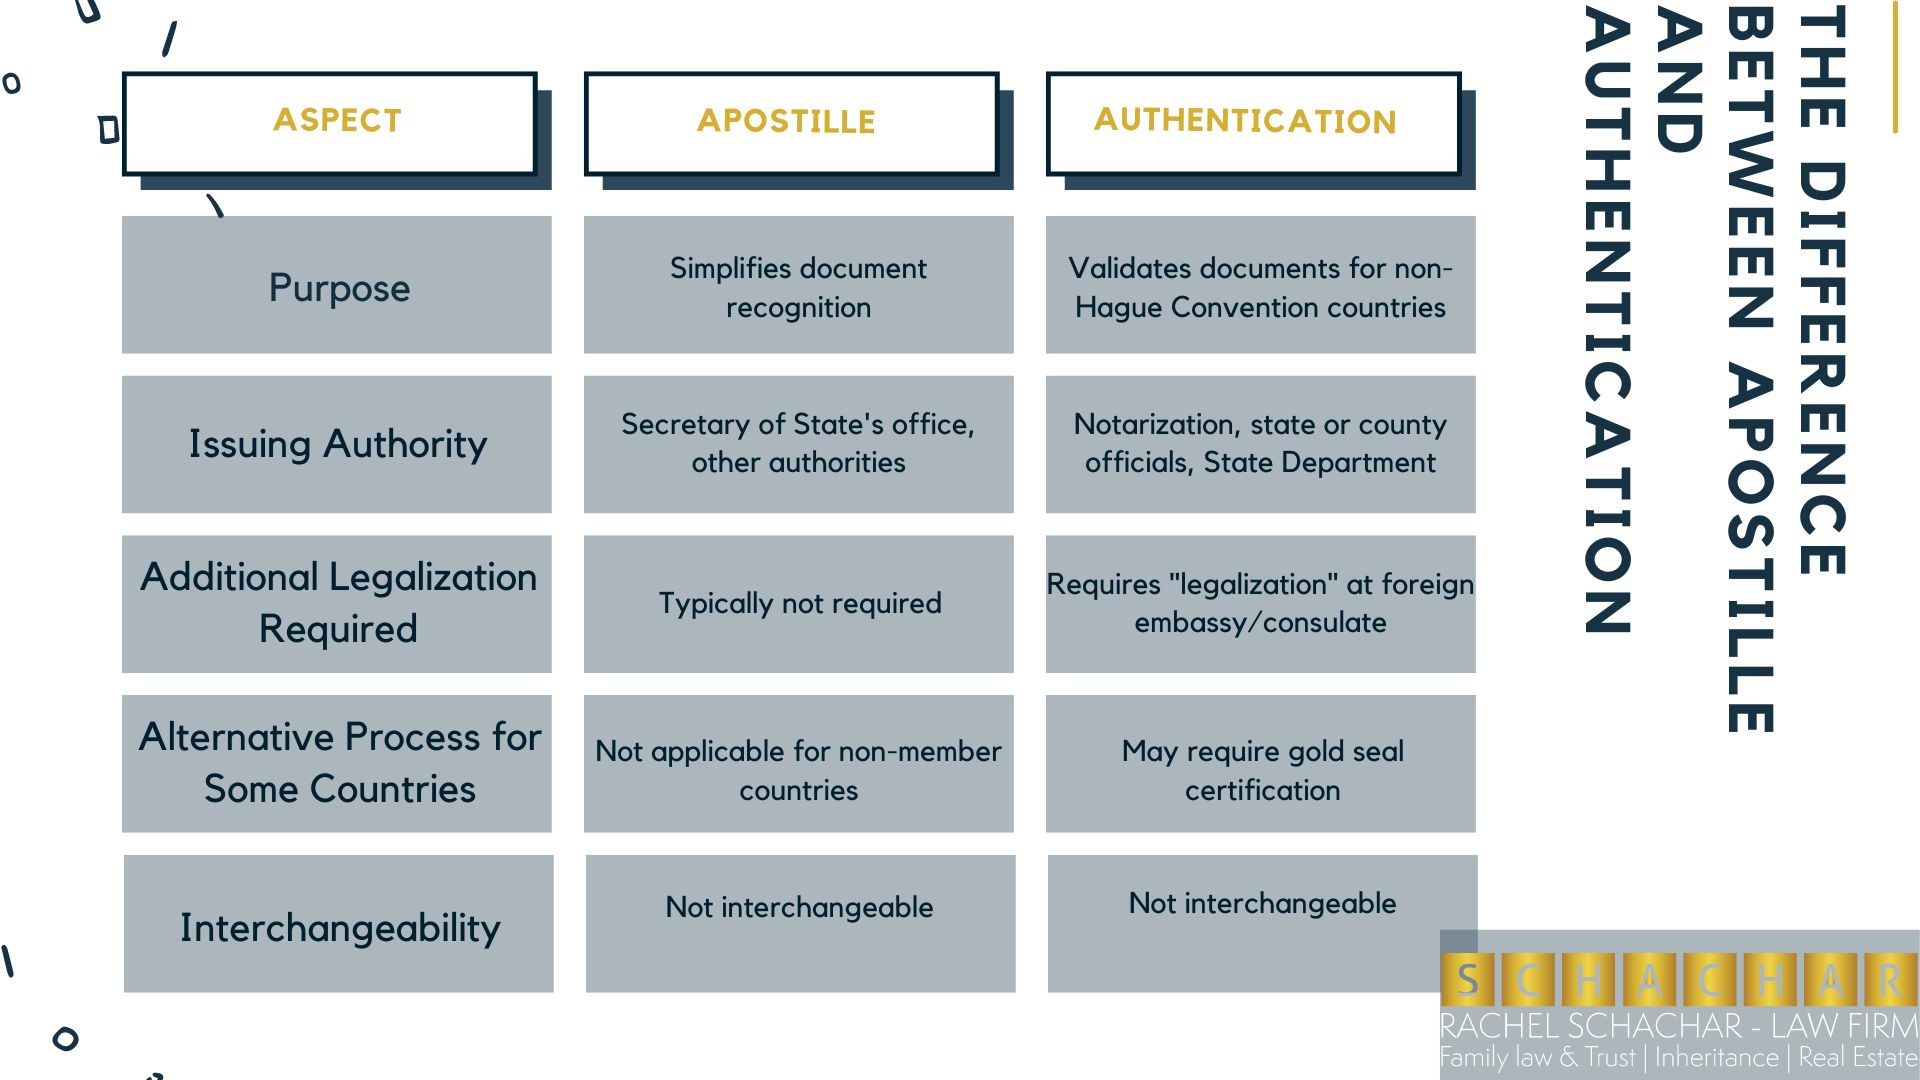 Understanding the Difference Between Authenticated and Apostille Documents